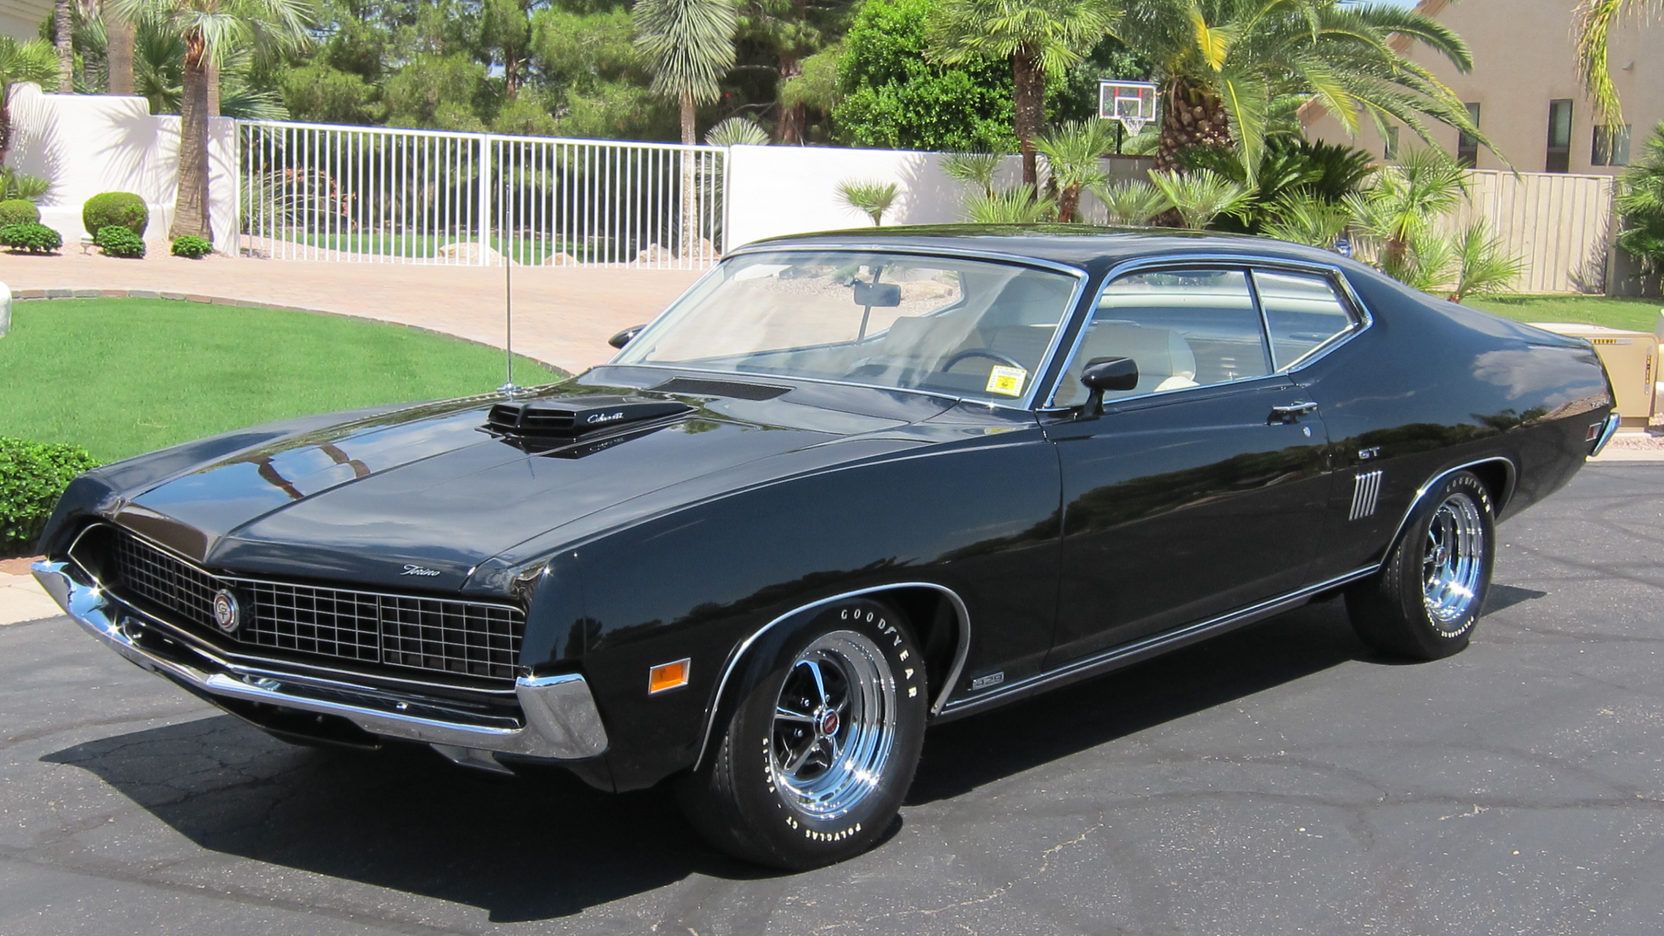 A parked black 1970 Ford Torino GT